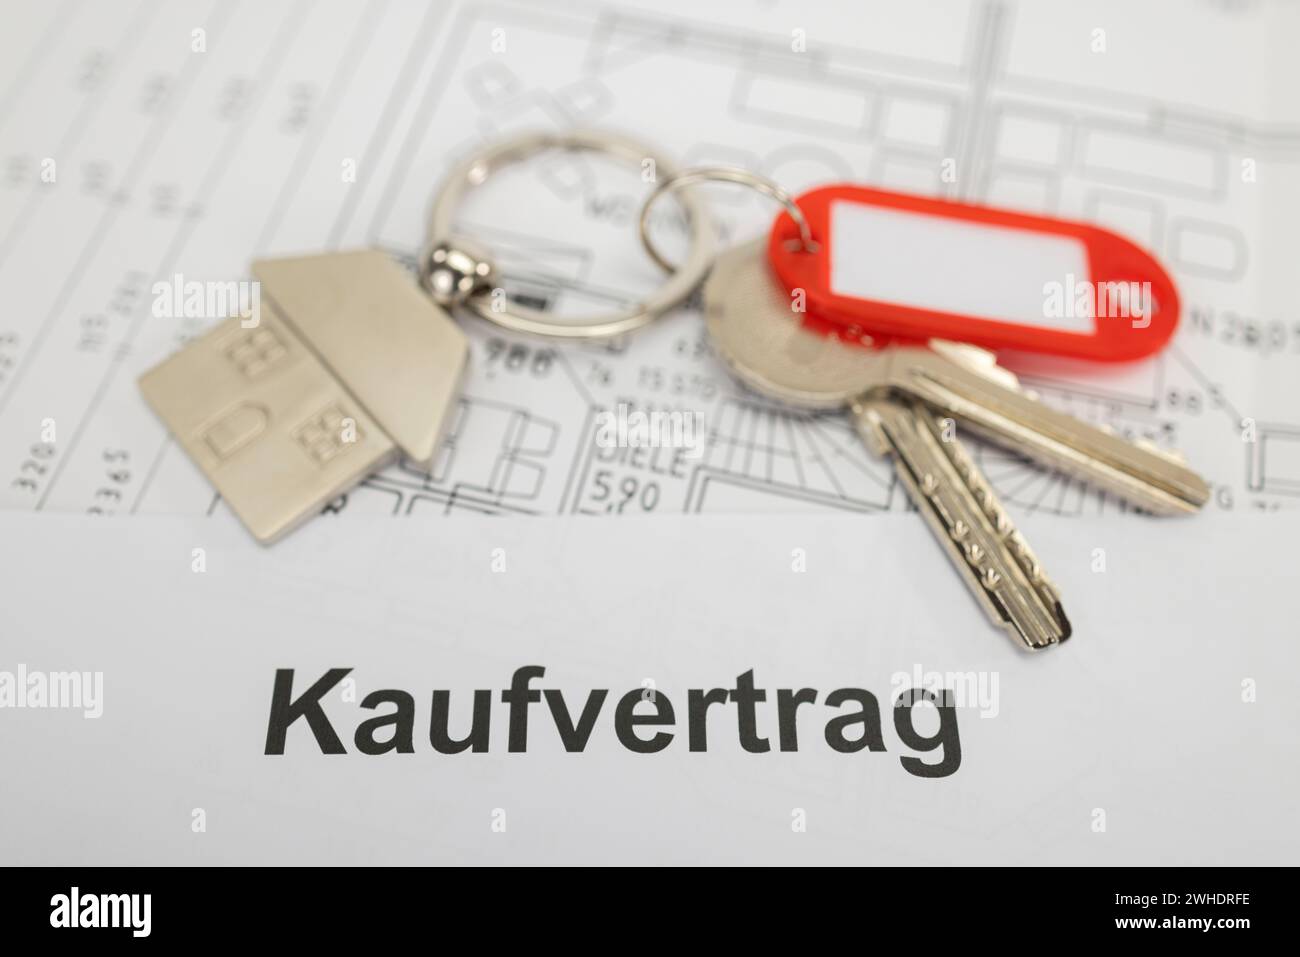 Key ring with metal key fob house, red key fob, without labeling, sales contract, floor plan, Stock Photo